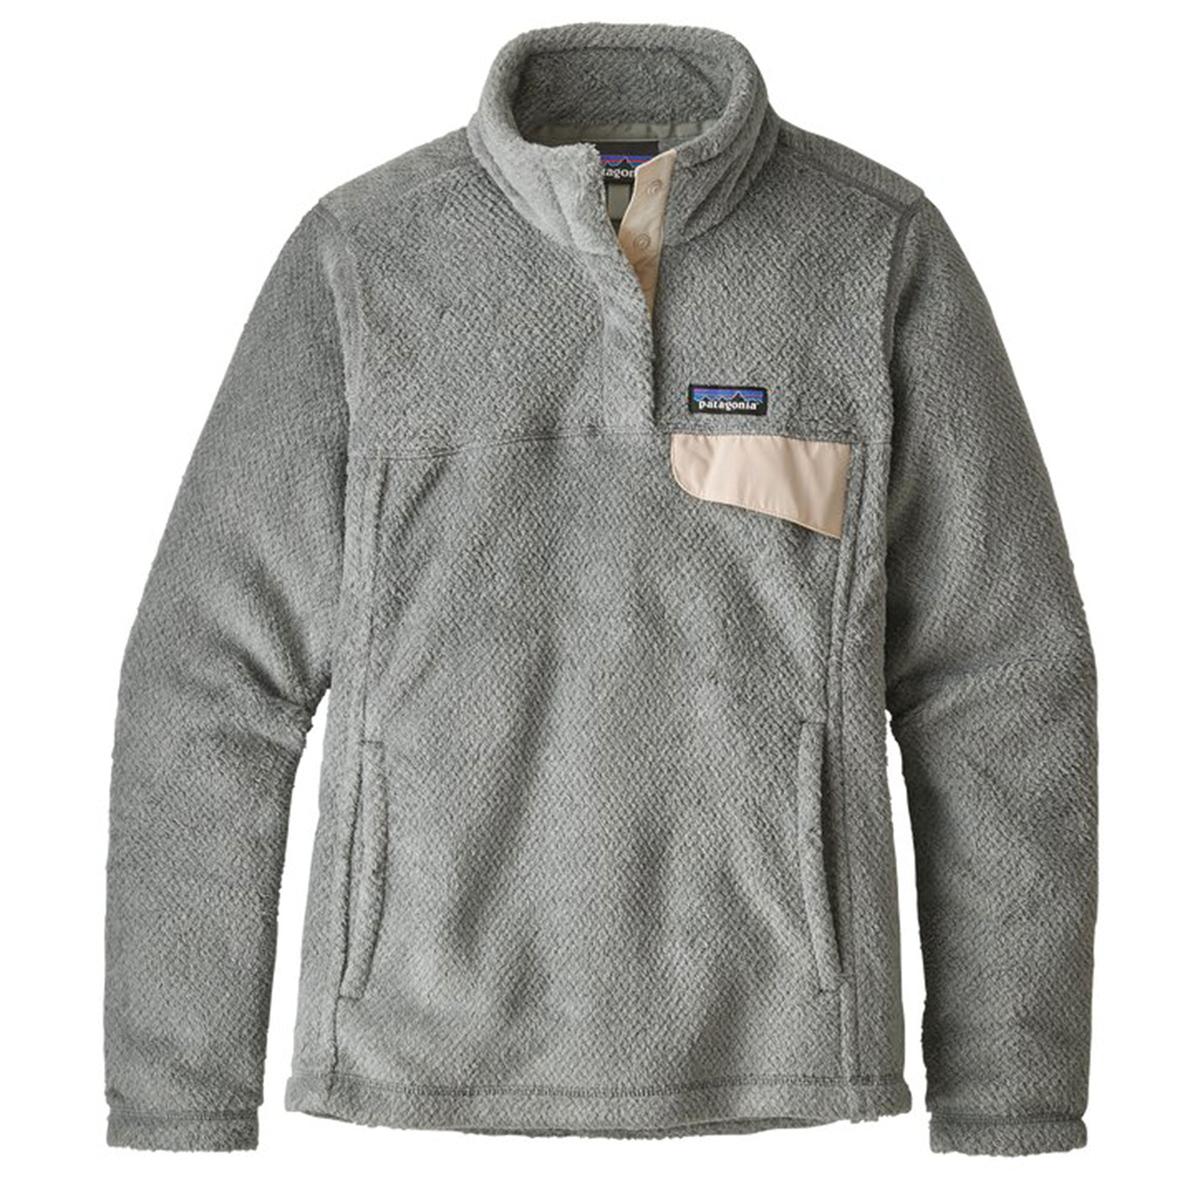 Patagonia Women's Re-Tool Snap-T® Pullover - Sun & Ski Sports